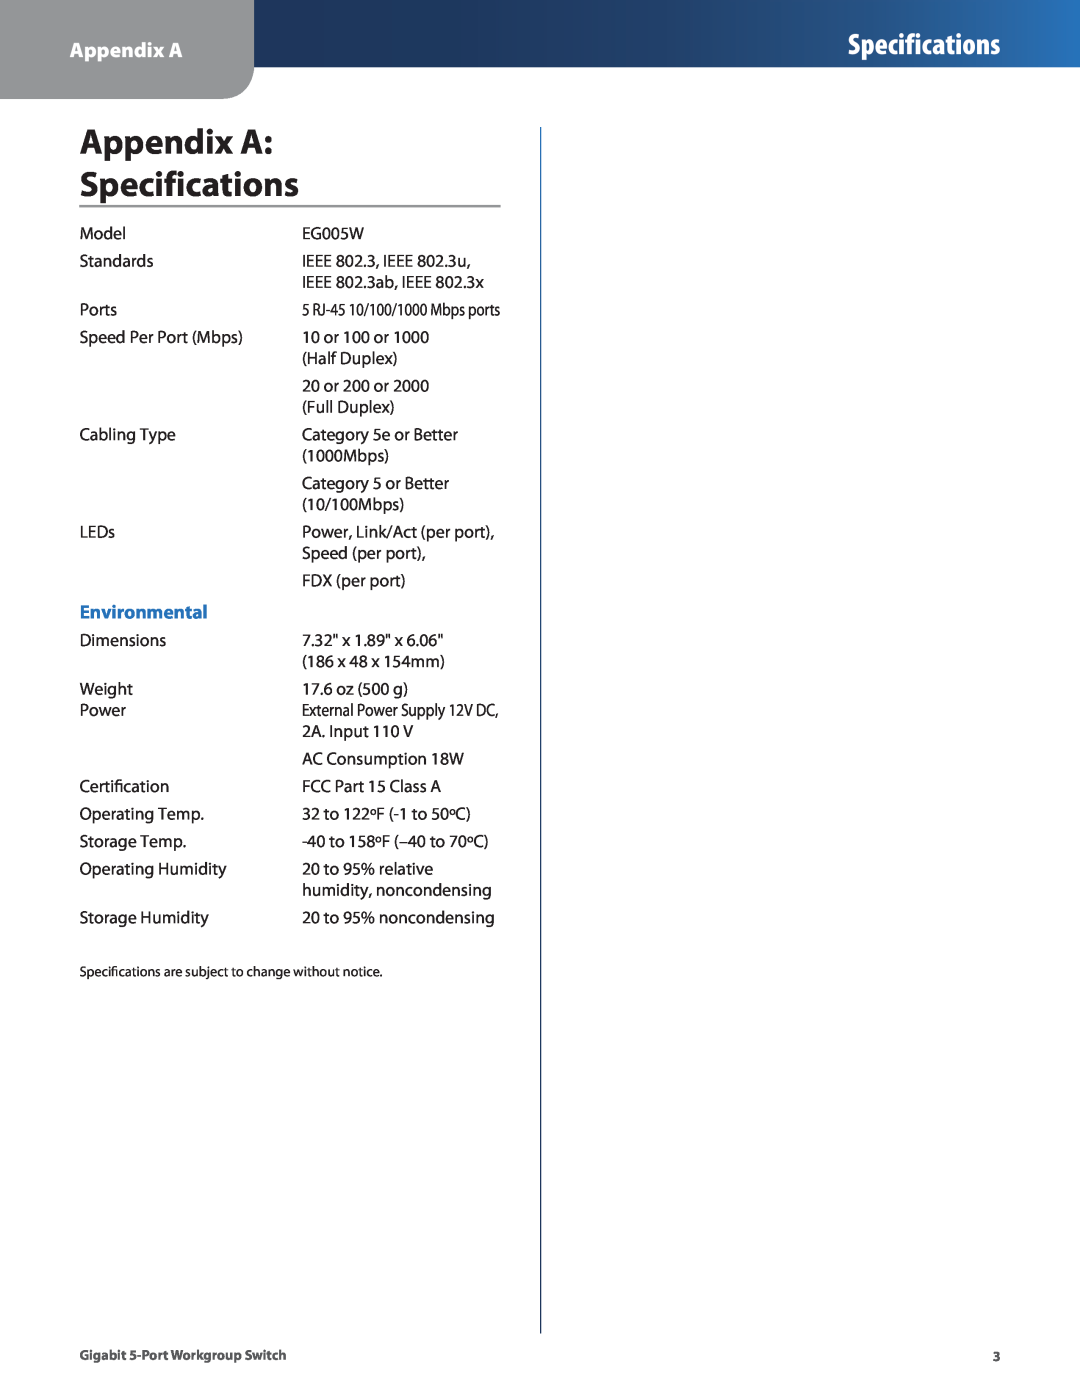 Cisco Systems EG005W manual Appendix A Specifications, Environmental 